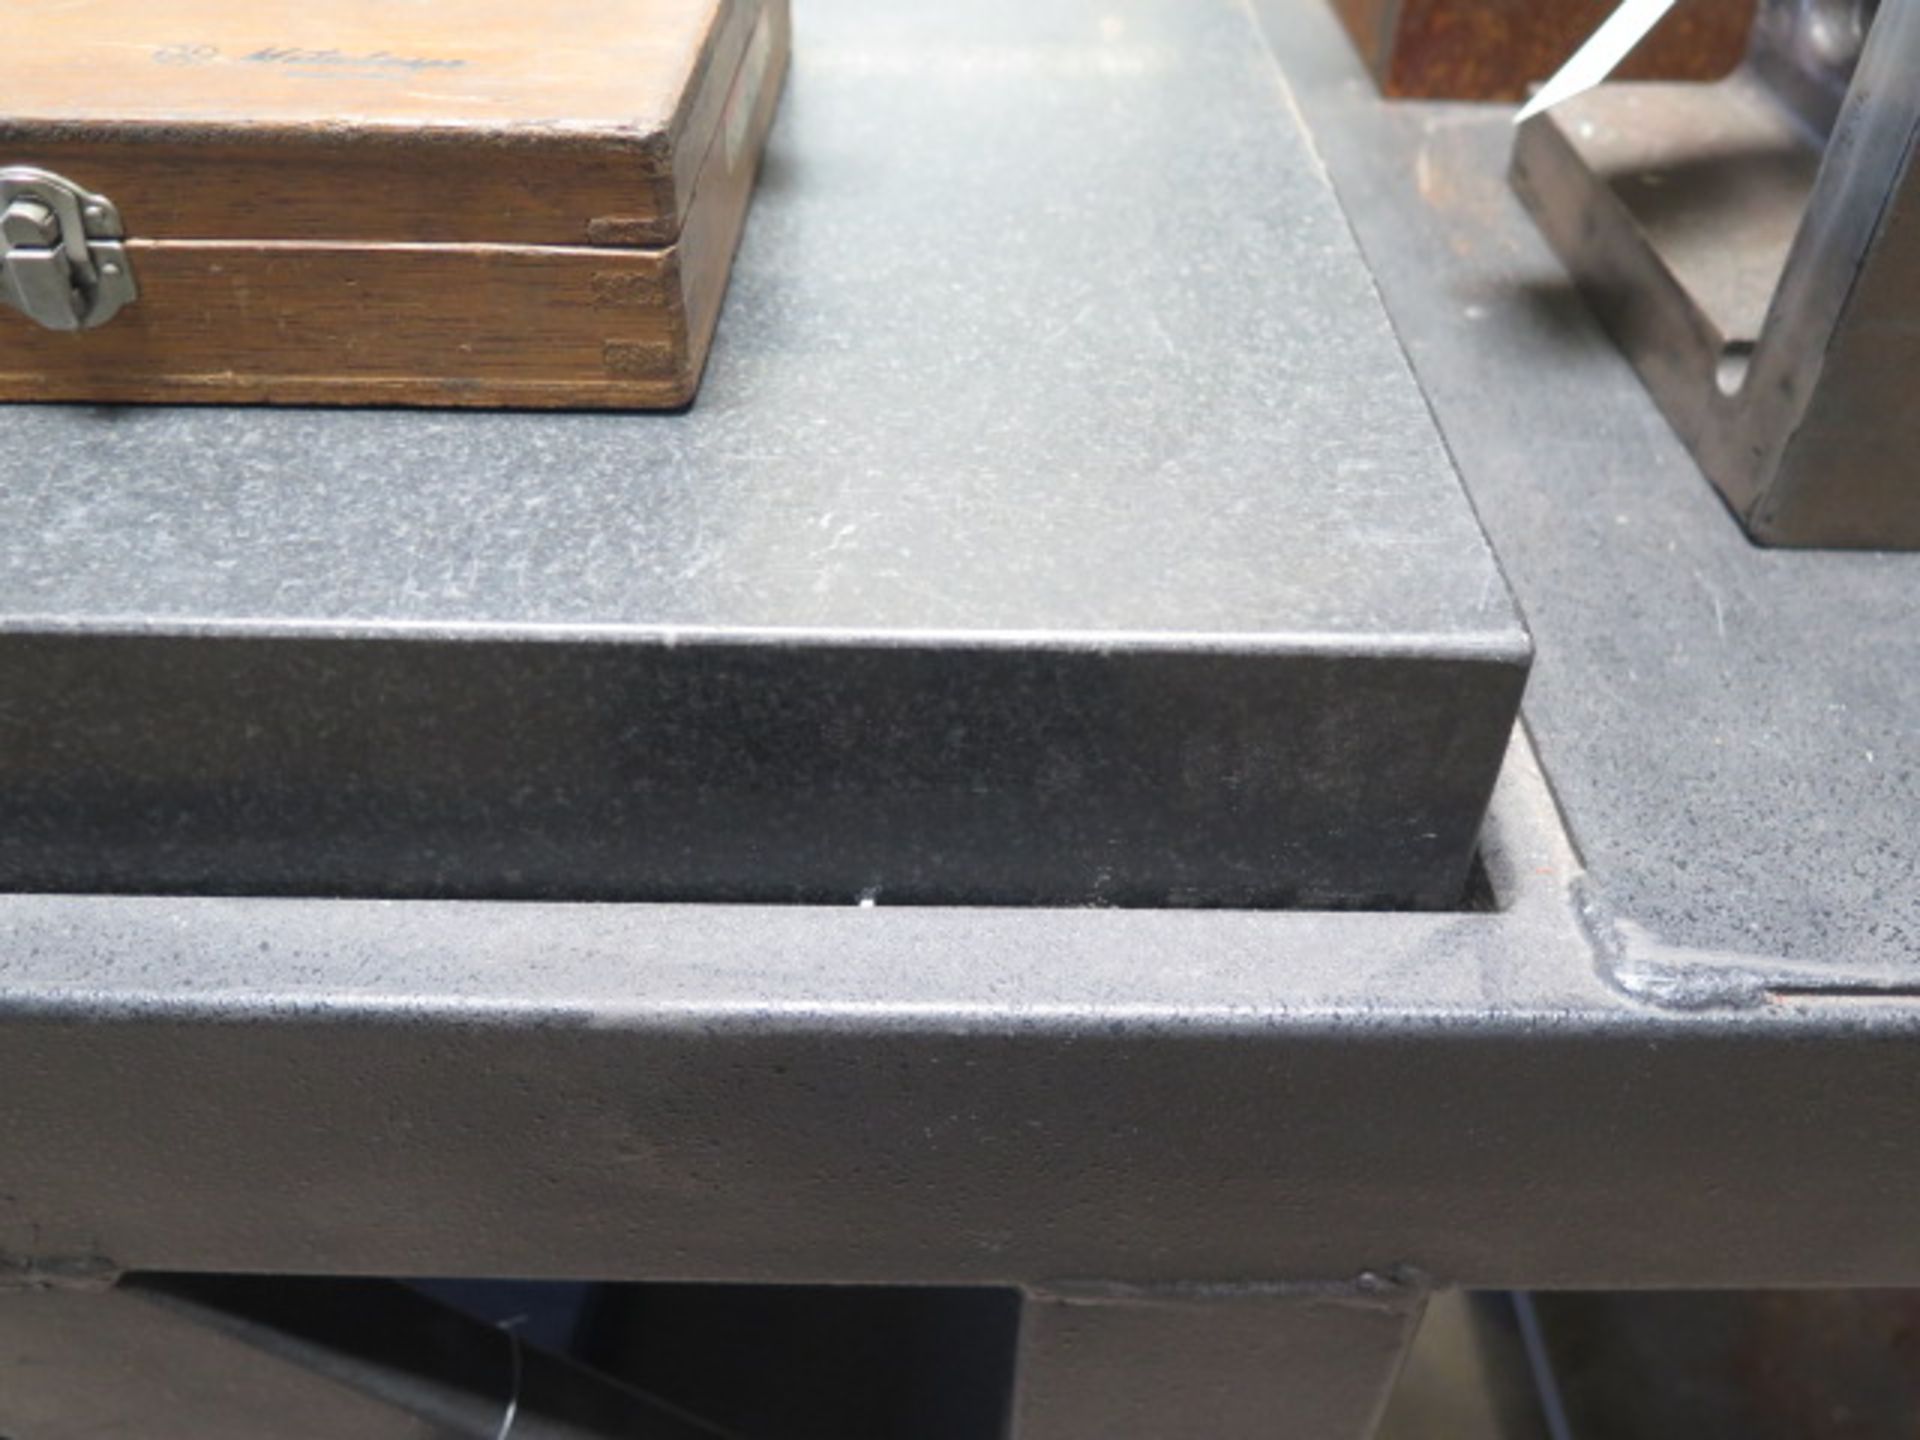 24” x 36” x 4” Granite Surface Plate w/ Roll Stand - Image 2 of 2